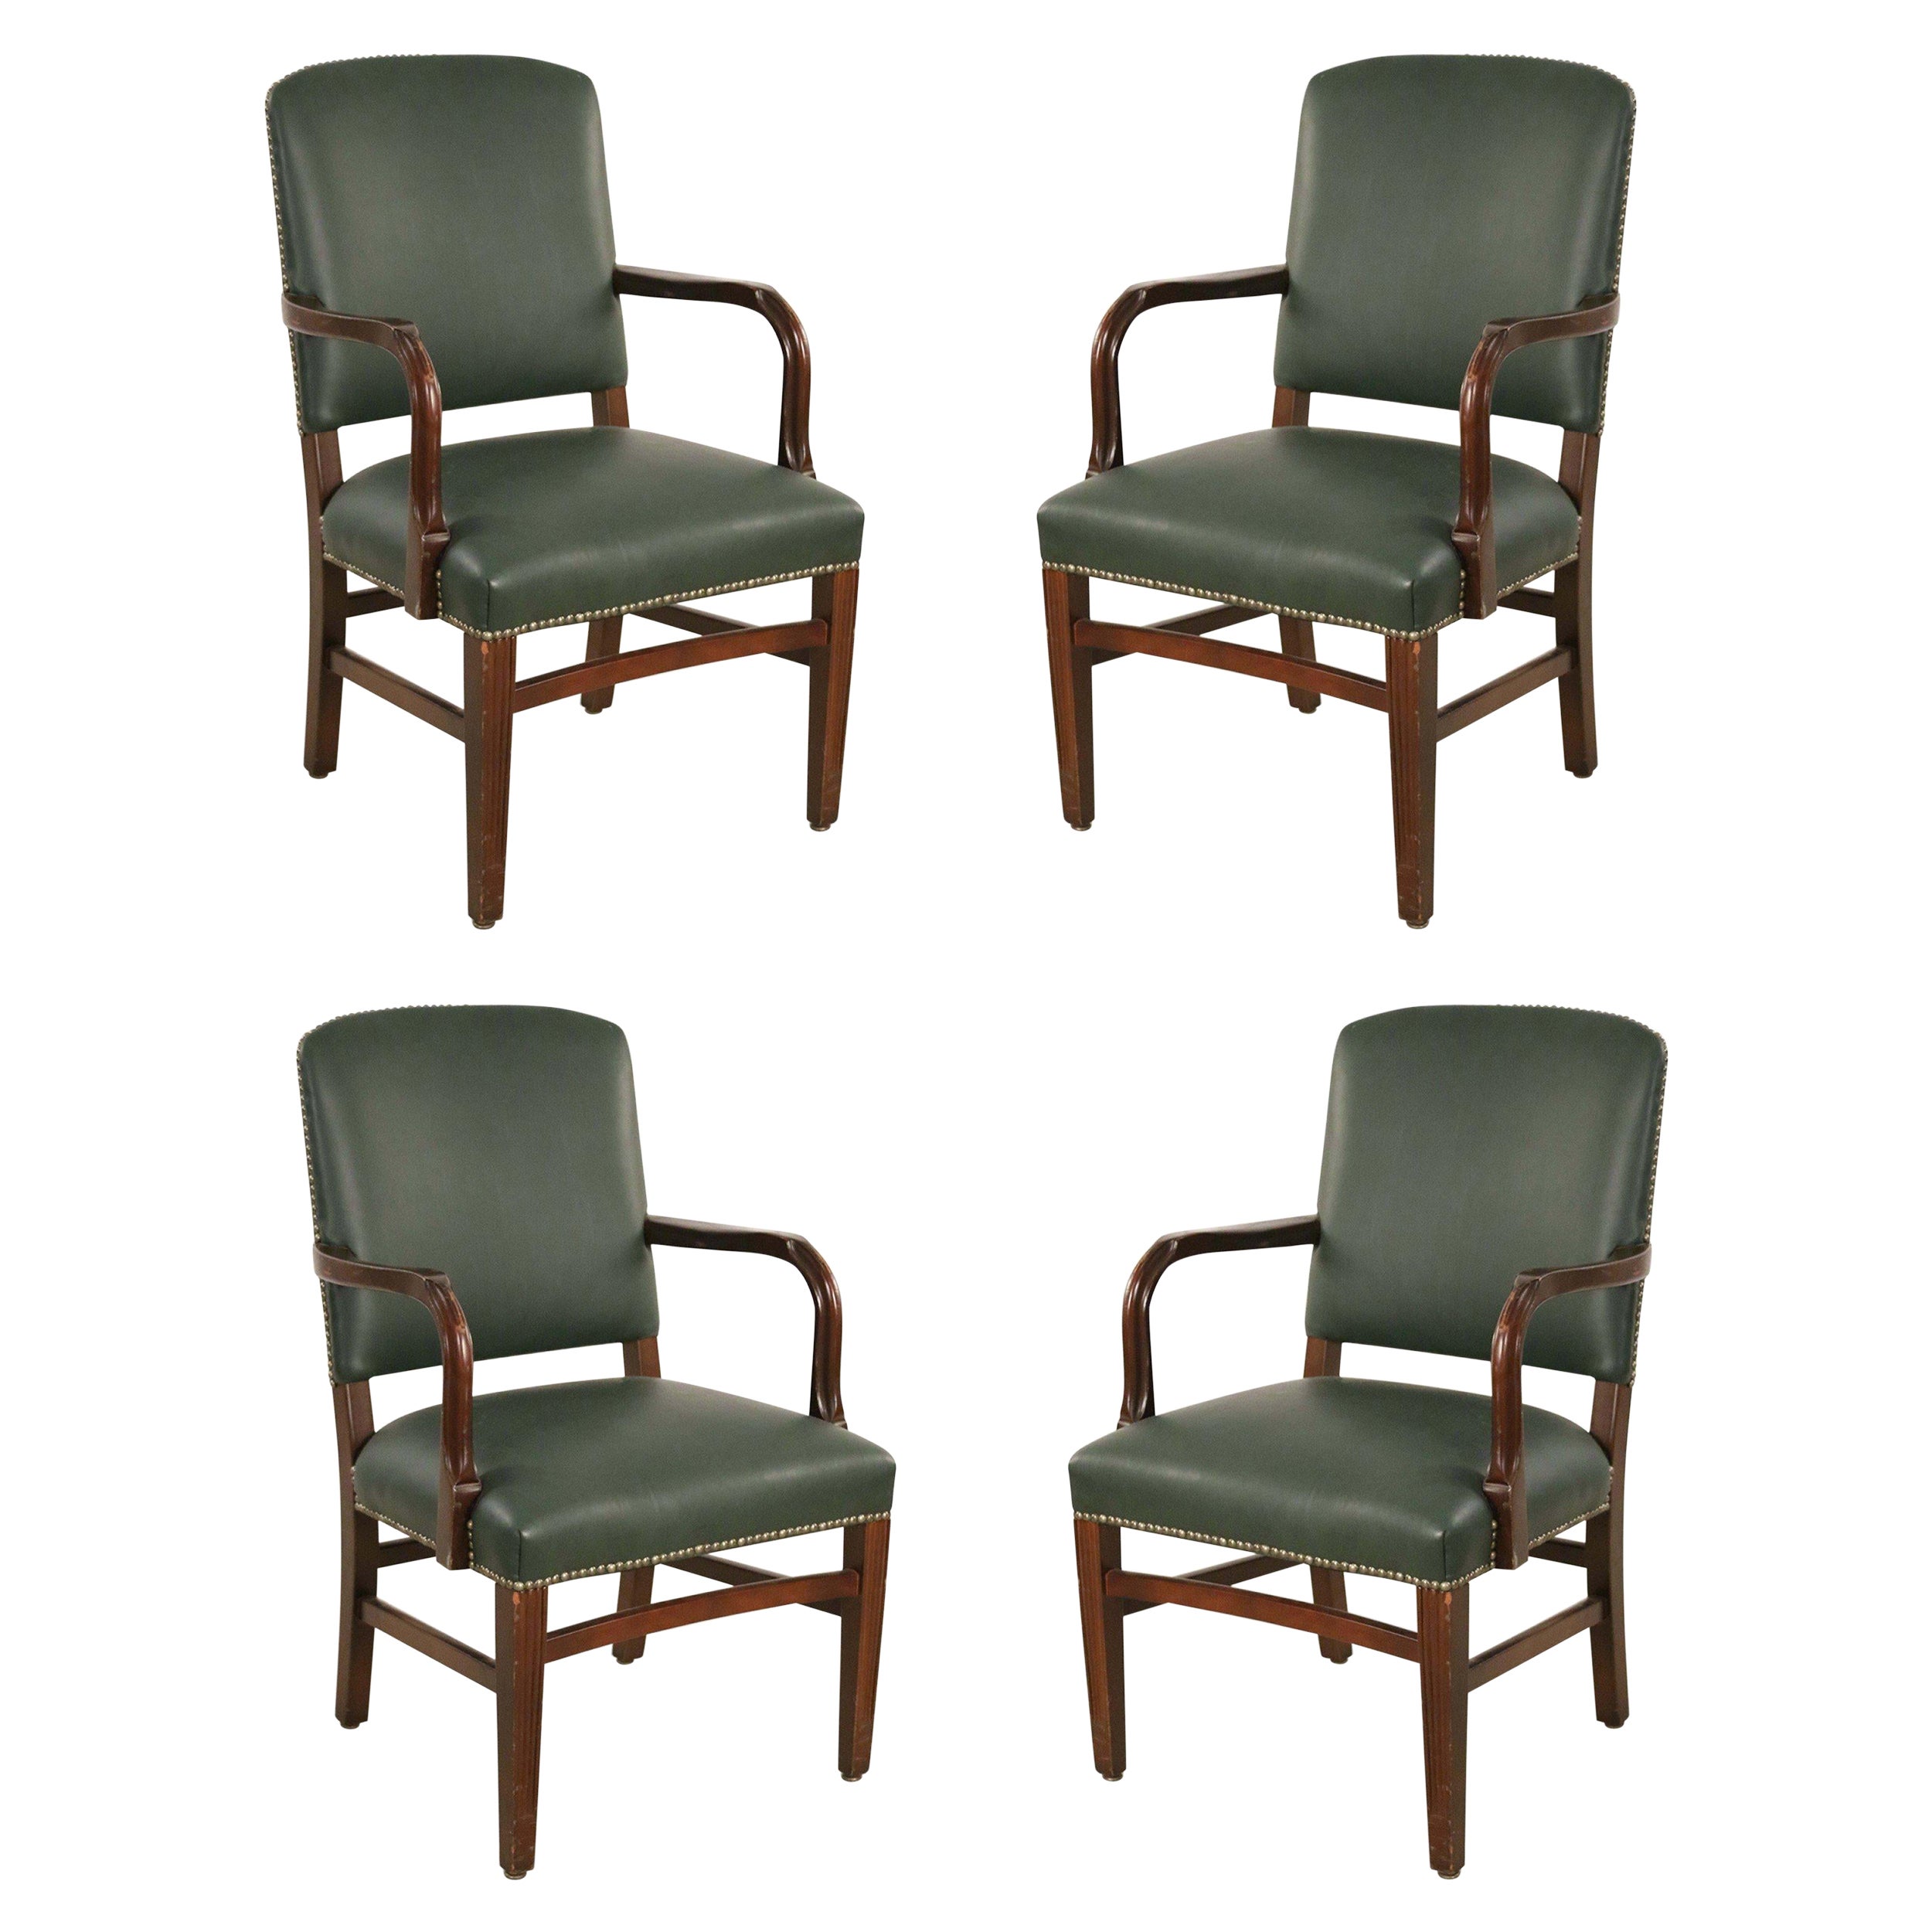 Set of 4 English Victorian Style Green Leather and Mahogany Armchairs